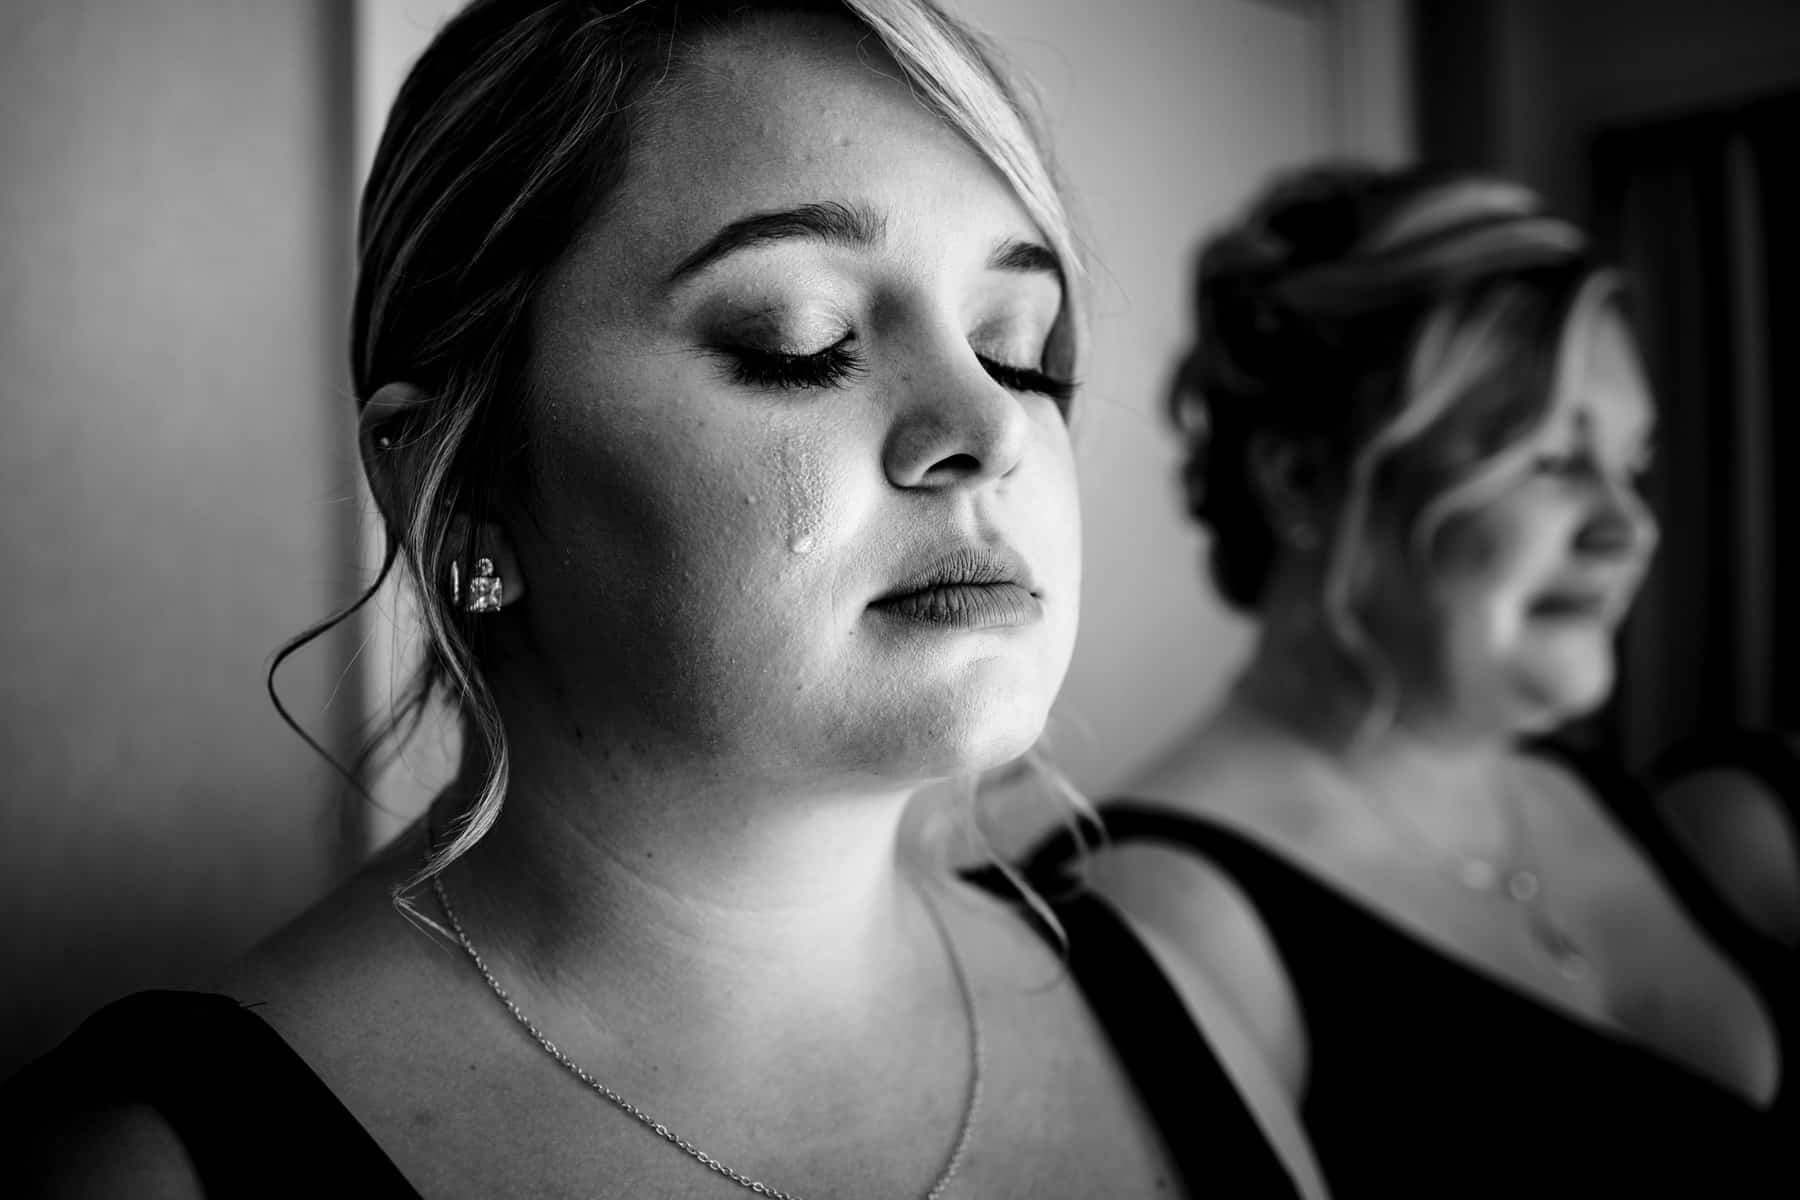 Two bridesmaids looking at each other in black and white.